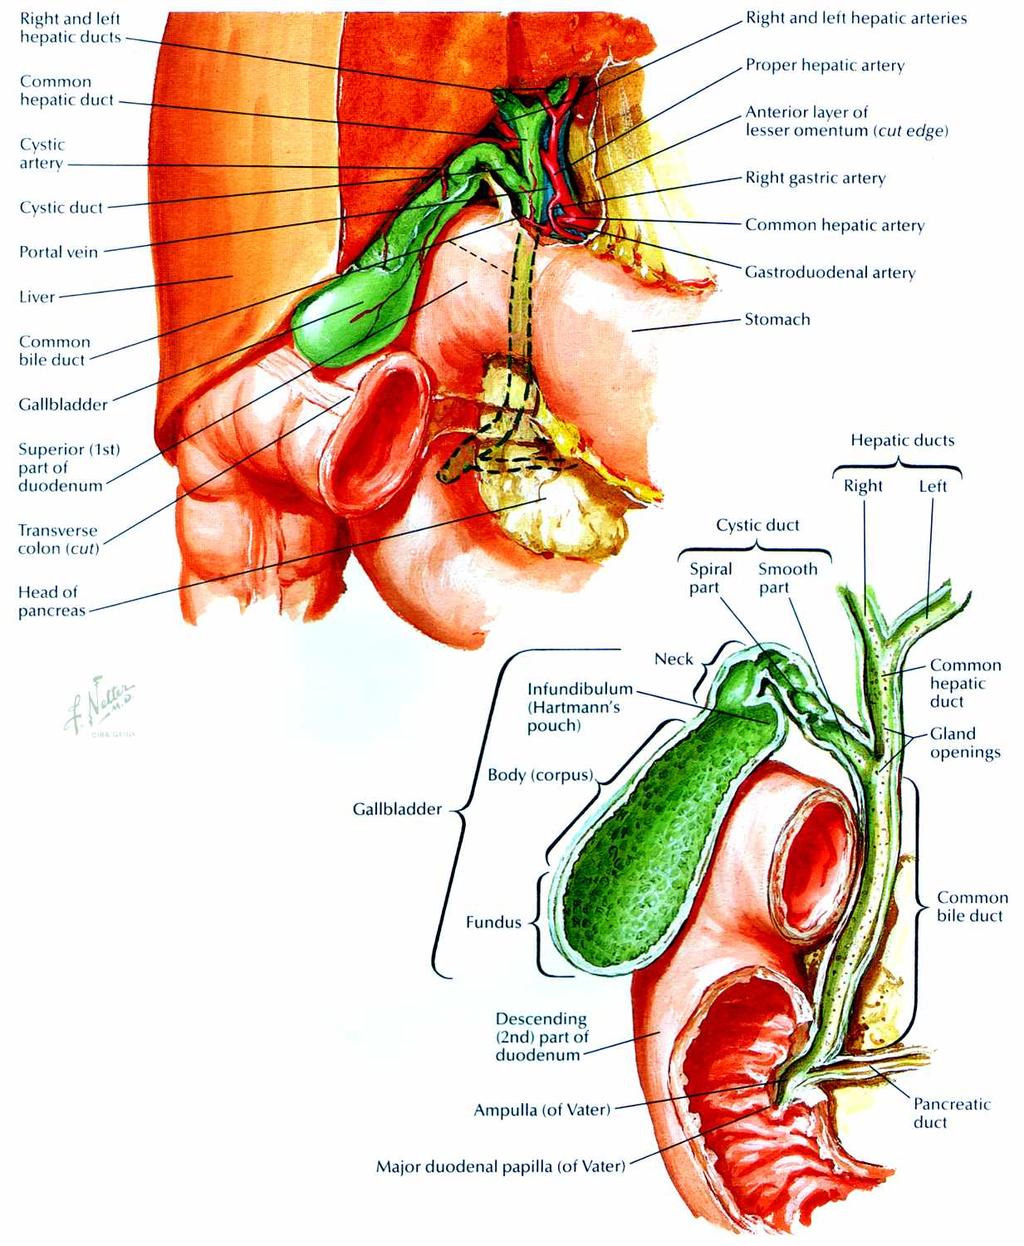 Anatomical Overview Gall bladder Fossa on visceral surface of liver between right & left hepatic